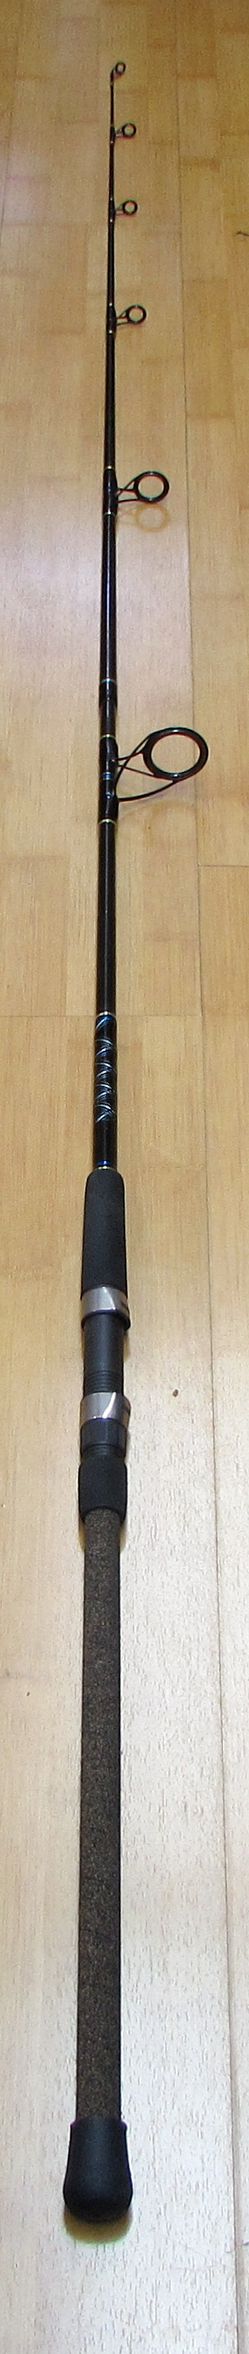 ANDE TOURNAMENT SURF ATS-800A 2- PIECE FISHING ROD 8'0